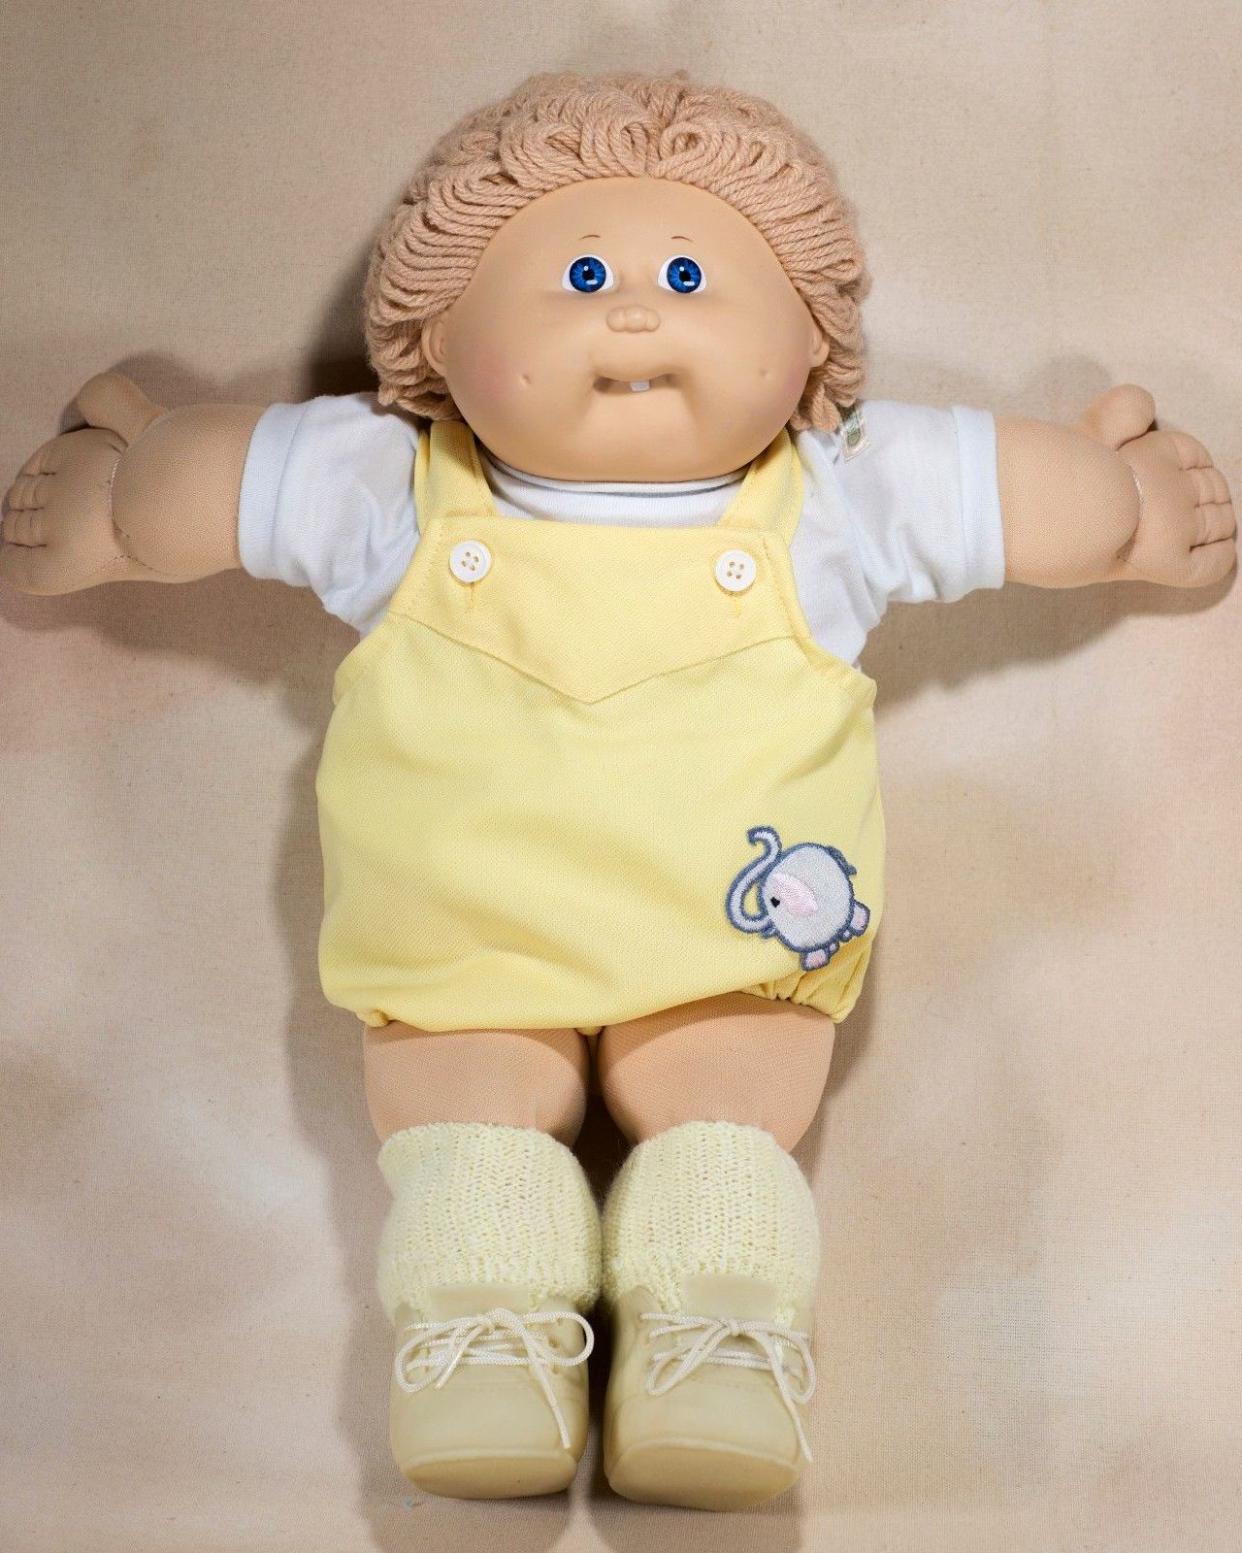 Original Coleco Cabbage Patch Doll